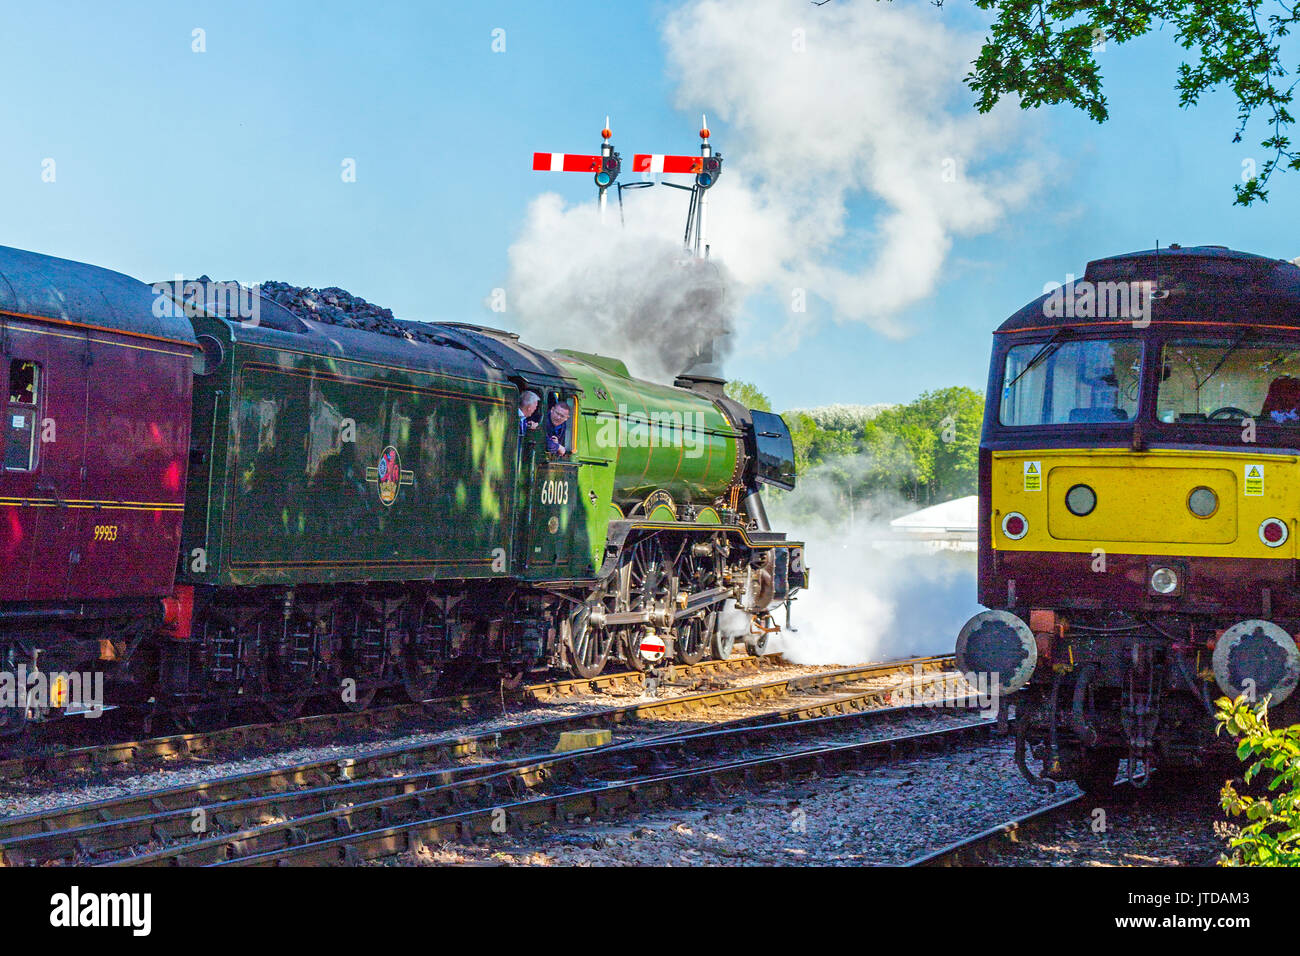 The world famous ex-LNER steam locomotive No.60103 'Flying Scotsman' at Bishops Lydeard on the West Somerset Railway, England, UK Stock Photo